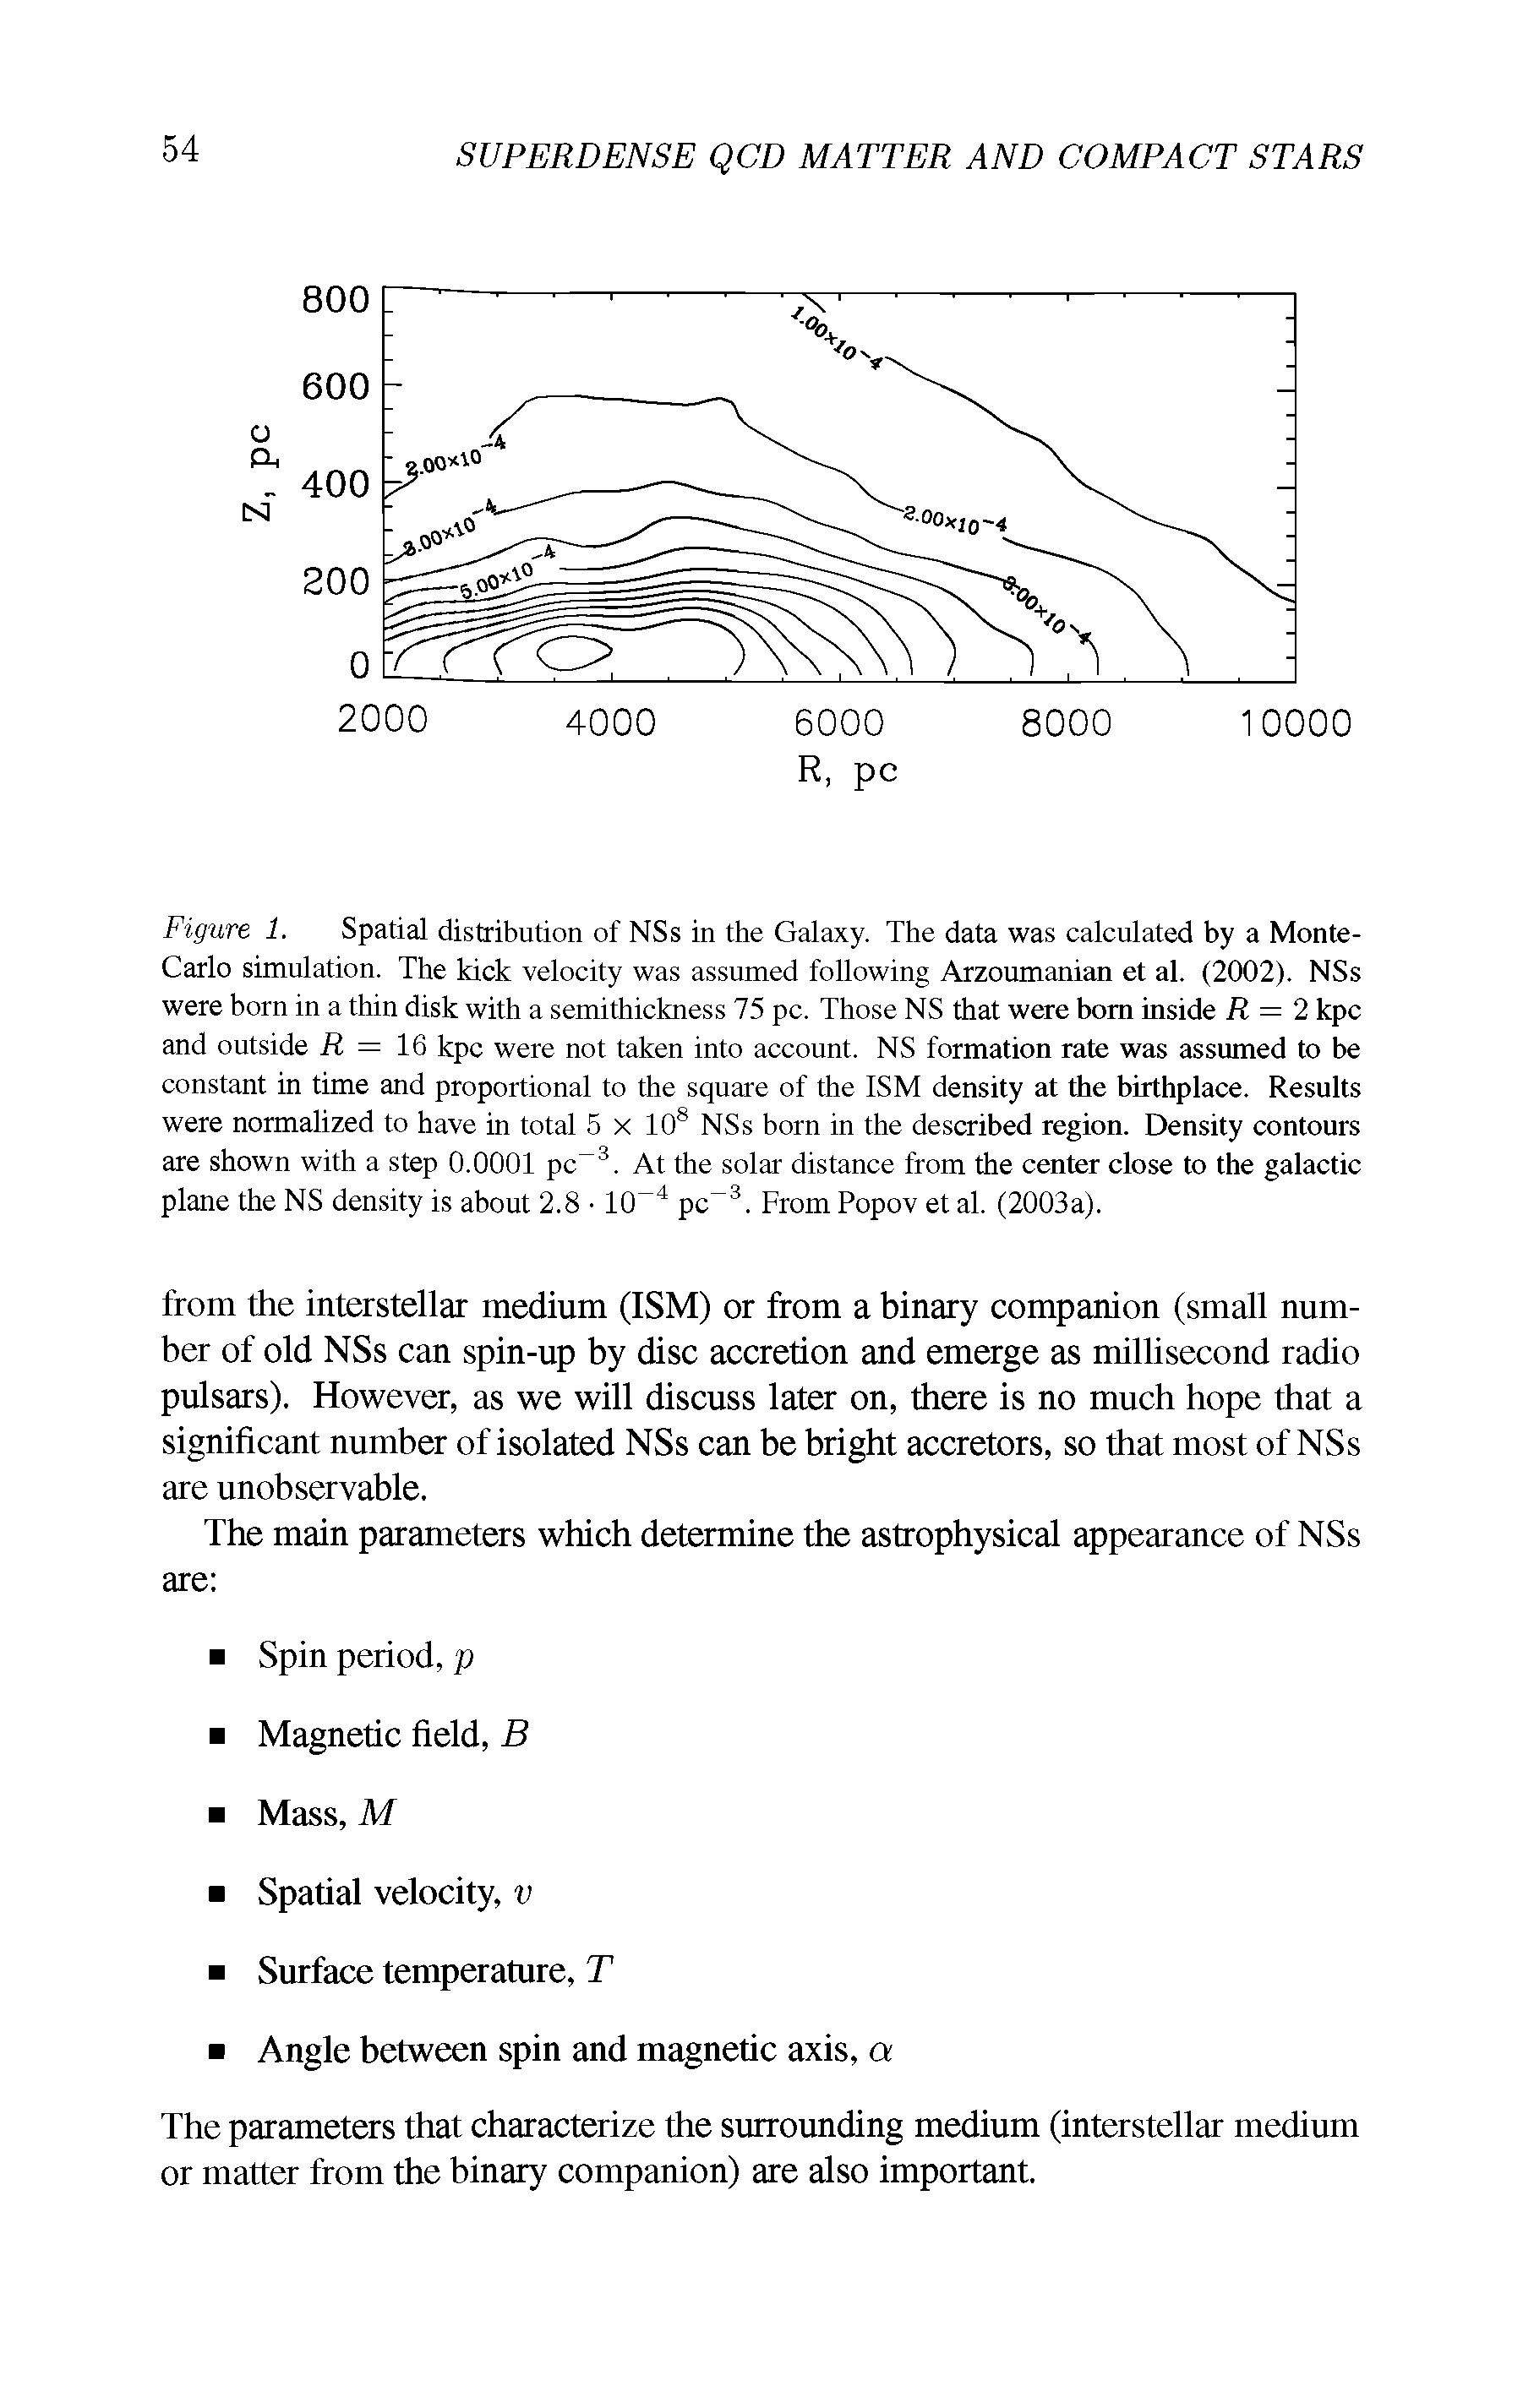 Figure 1. Spatial distribution of NSs in the Galaxy. The data was calculated by a Monte-Carlo simulation. The kick velocity was assumed following Arzoumanian et al. (2002). NSs were born in a thin disk with a semithickness 75 pc. Those NS that were bom inside R = 2 kpc and outside R = 16 kpc were not taken into account. NS formation rate was assumed to be constant in time and proportional to the square of the ISM density at the birthplace. Results were normalized to have in total 5 x 108 NSs born in the described region. Density contours are shown with a step 0.0001 pc 3. At the solar distance from the center close to the galactic plane the NS density is about 2.8 1CT4 pc 3. From Popov et al. (2003a).